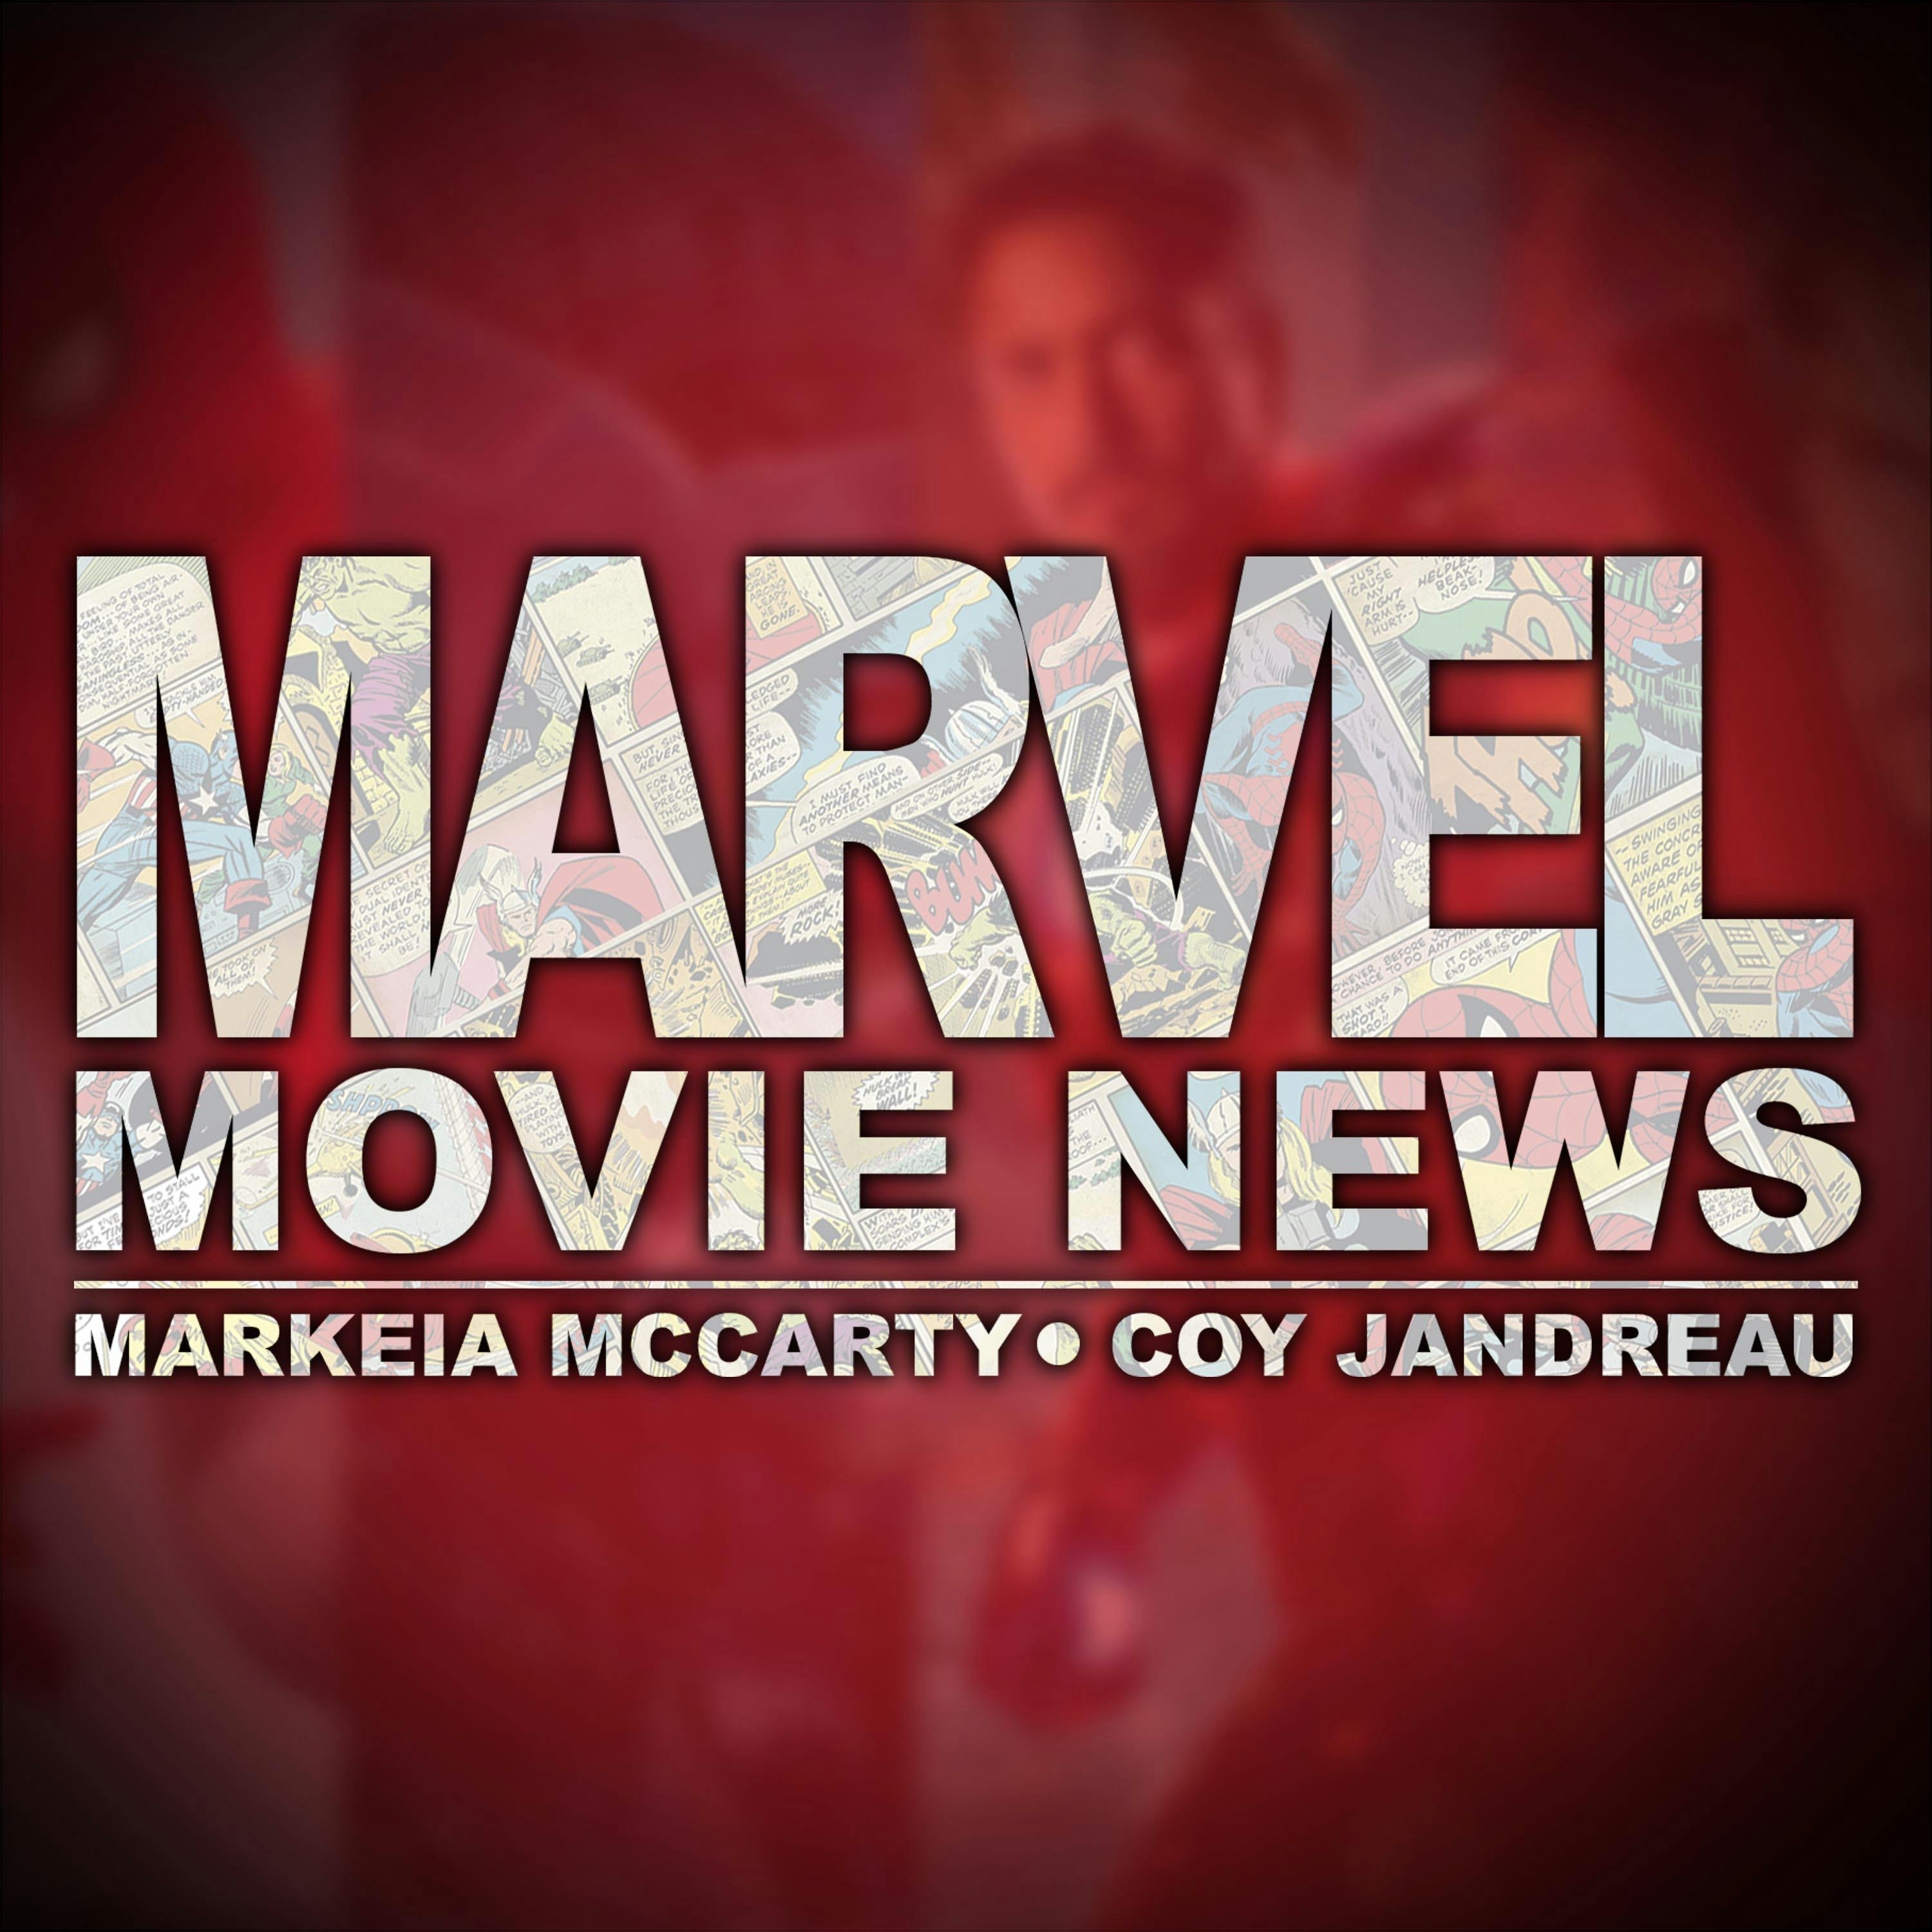 The DC/Marvel Movie News Comicas Holiday Special Spectacular! – Popcorn Talk Holiday Special